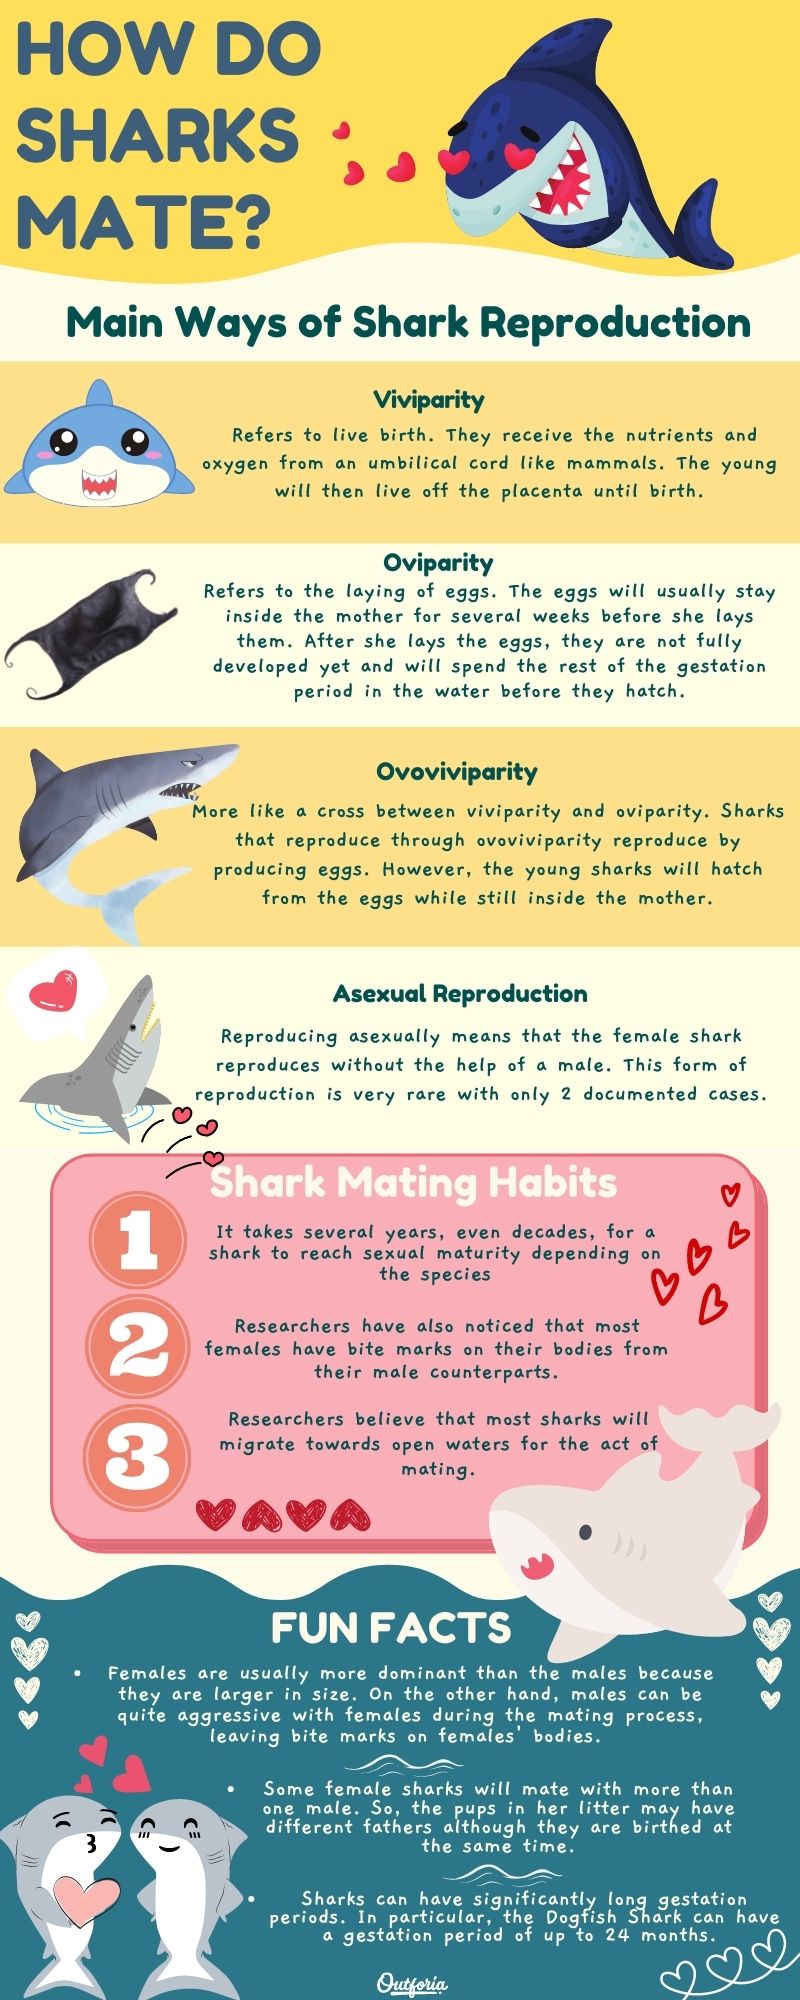 how do sharks mate chart with shark reproduction ways, shark mating habits, and, fun facts